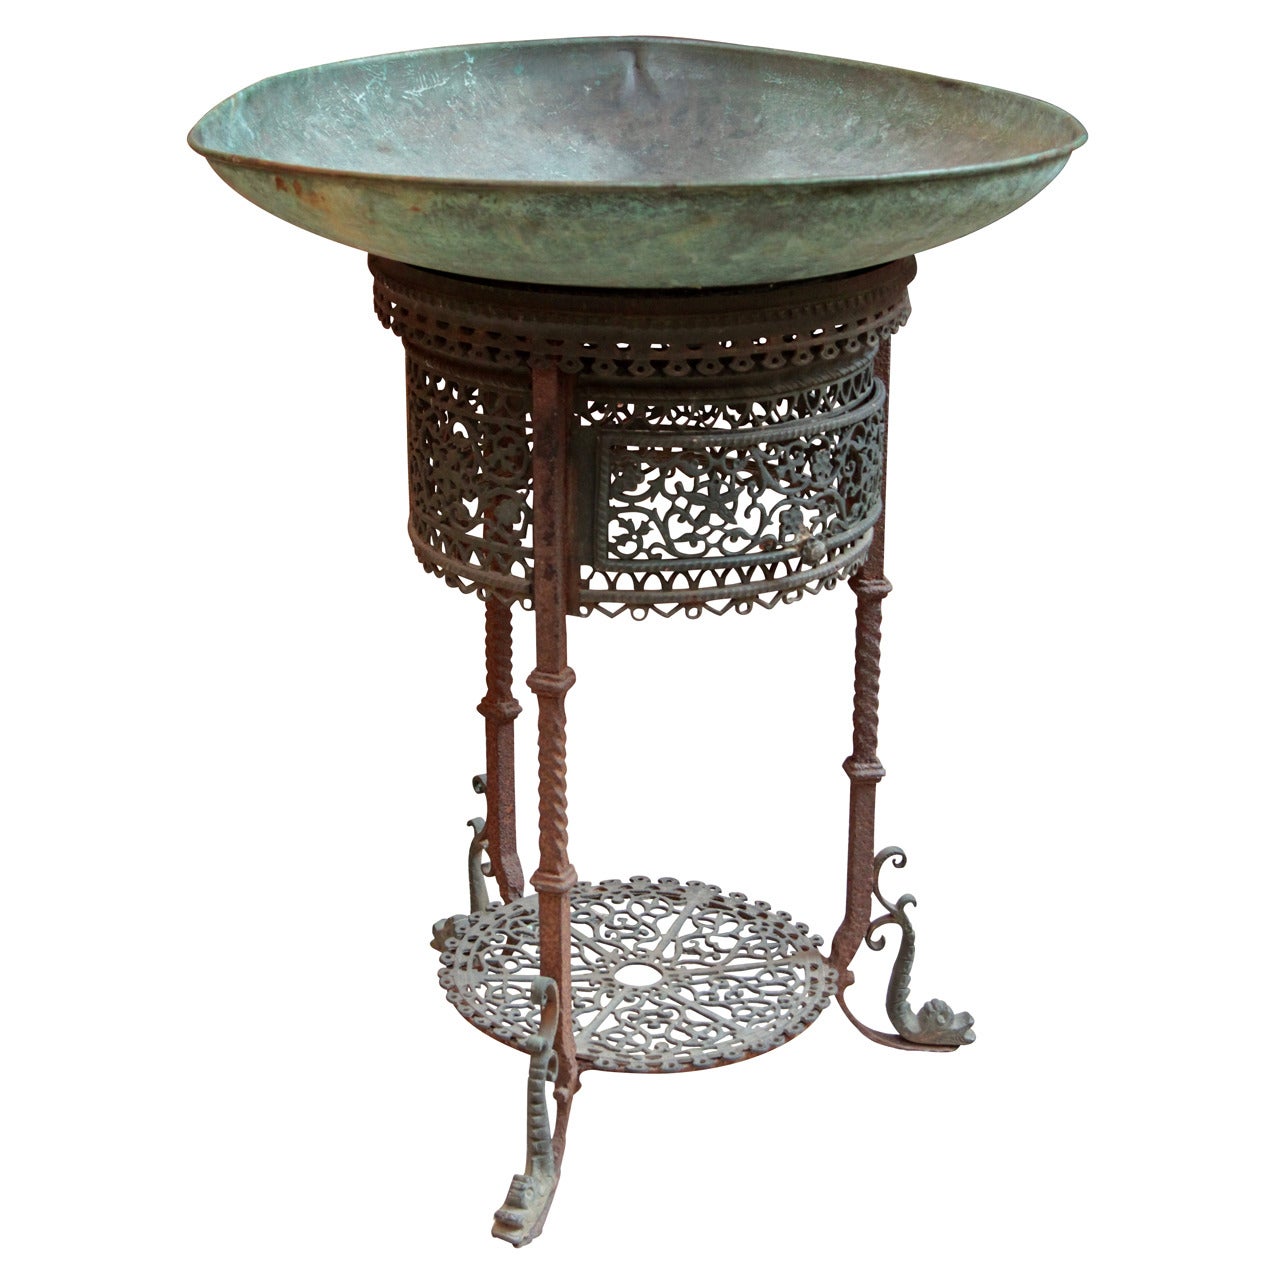 1890s Bronze and Copper Water Fountain in the Oscar Bach Style with patina